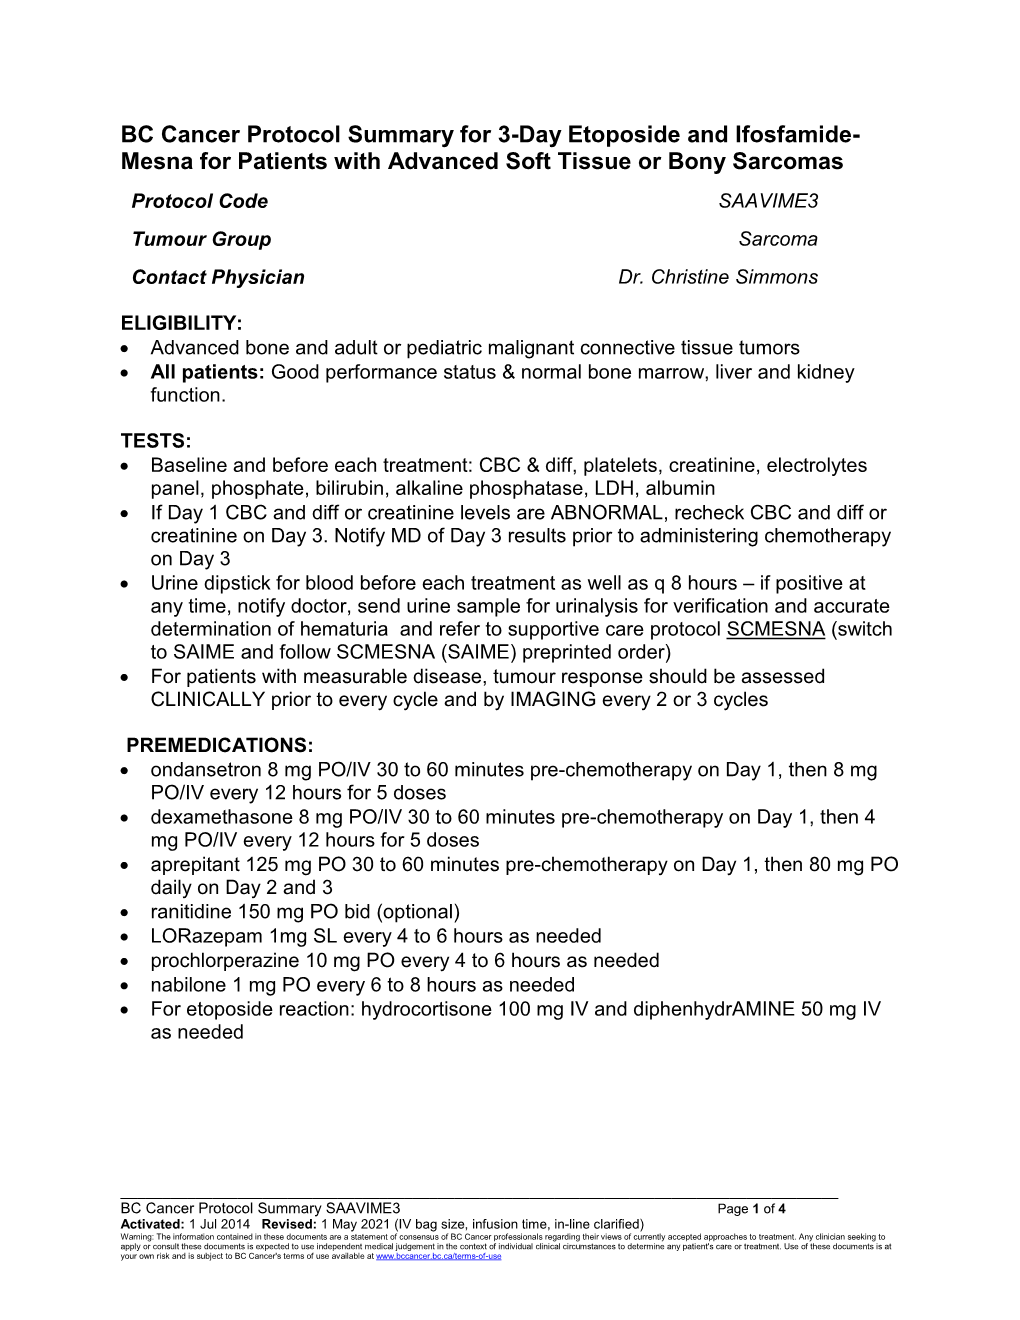 BC Cancer Protocol Summary for 3-Day Etoposide and Ifosfamide- Mesna for Patients with Advanced Soft Tissue Or Bony Sarcomas